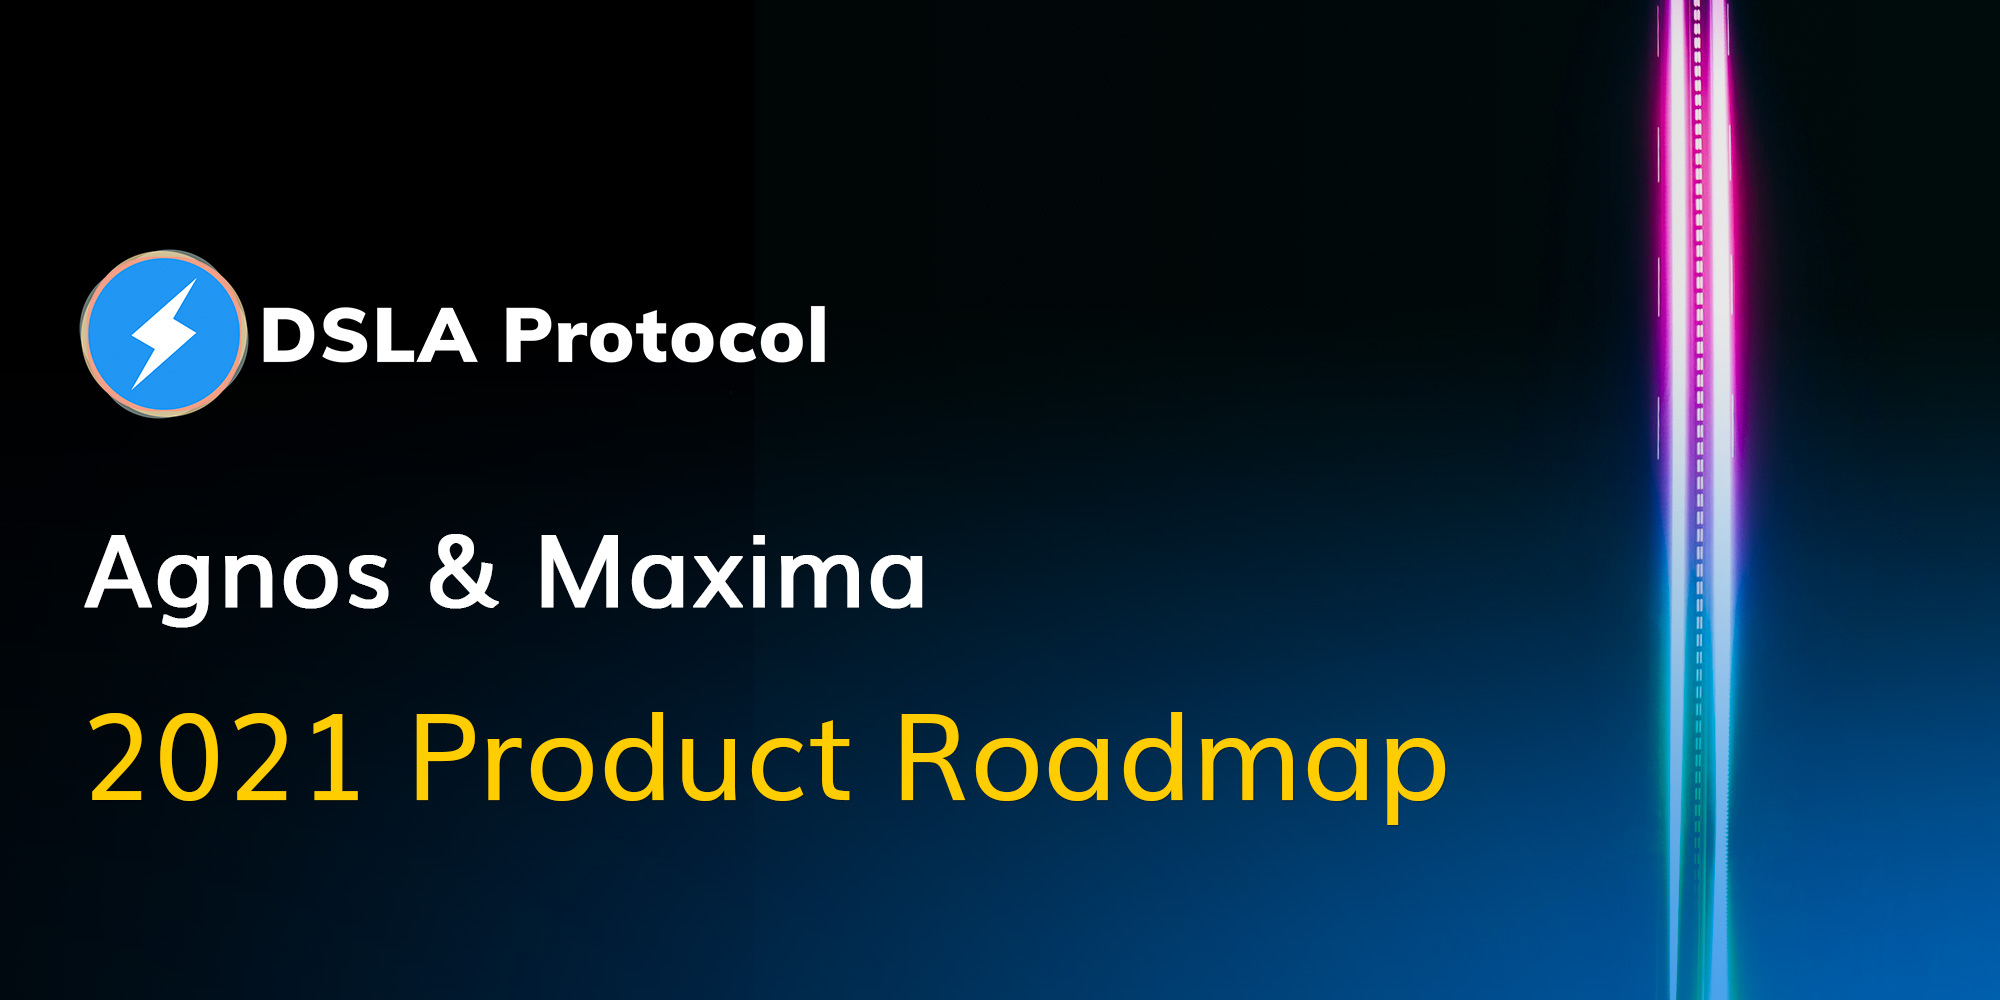 New Product Offering & 2021 Roadmap